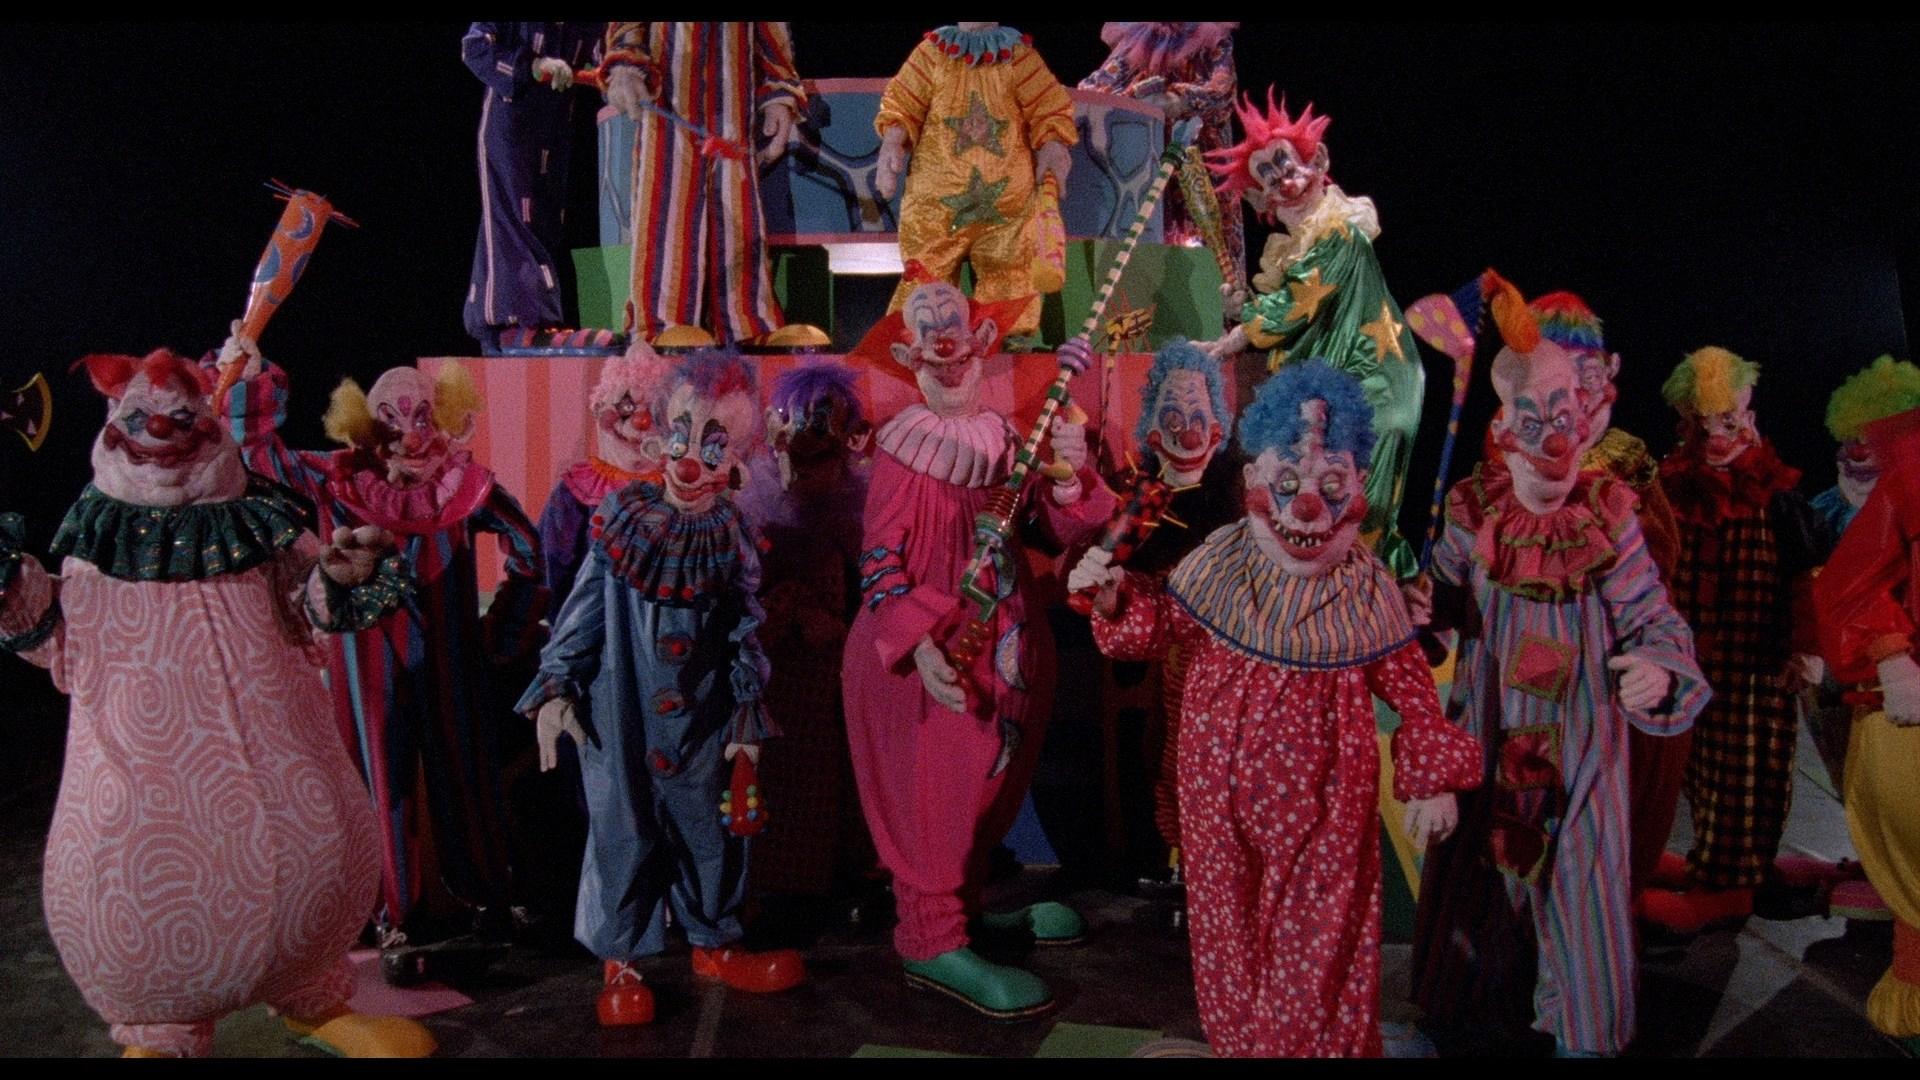 Killer Klowns from Outer Space Wallpapers - Top Free Killer Klowns from